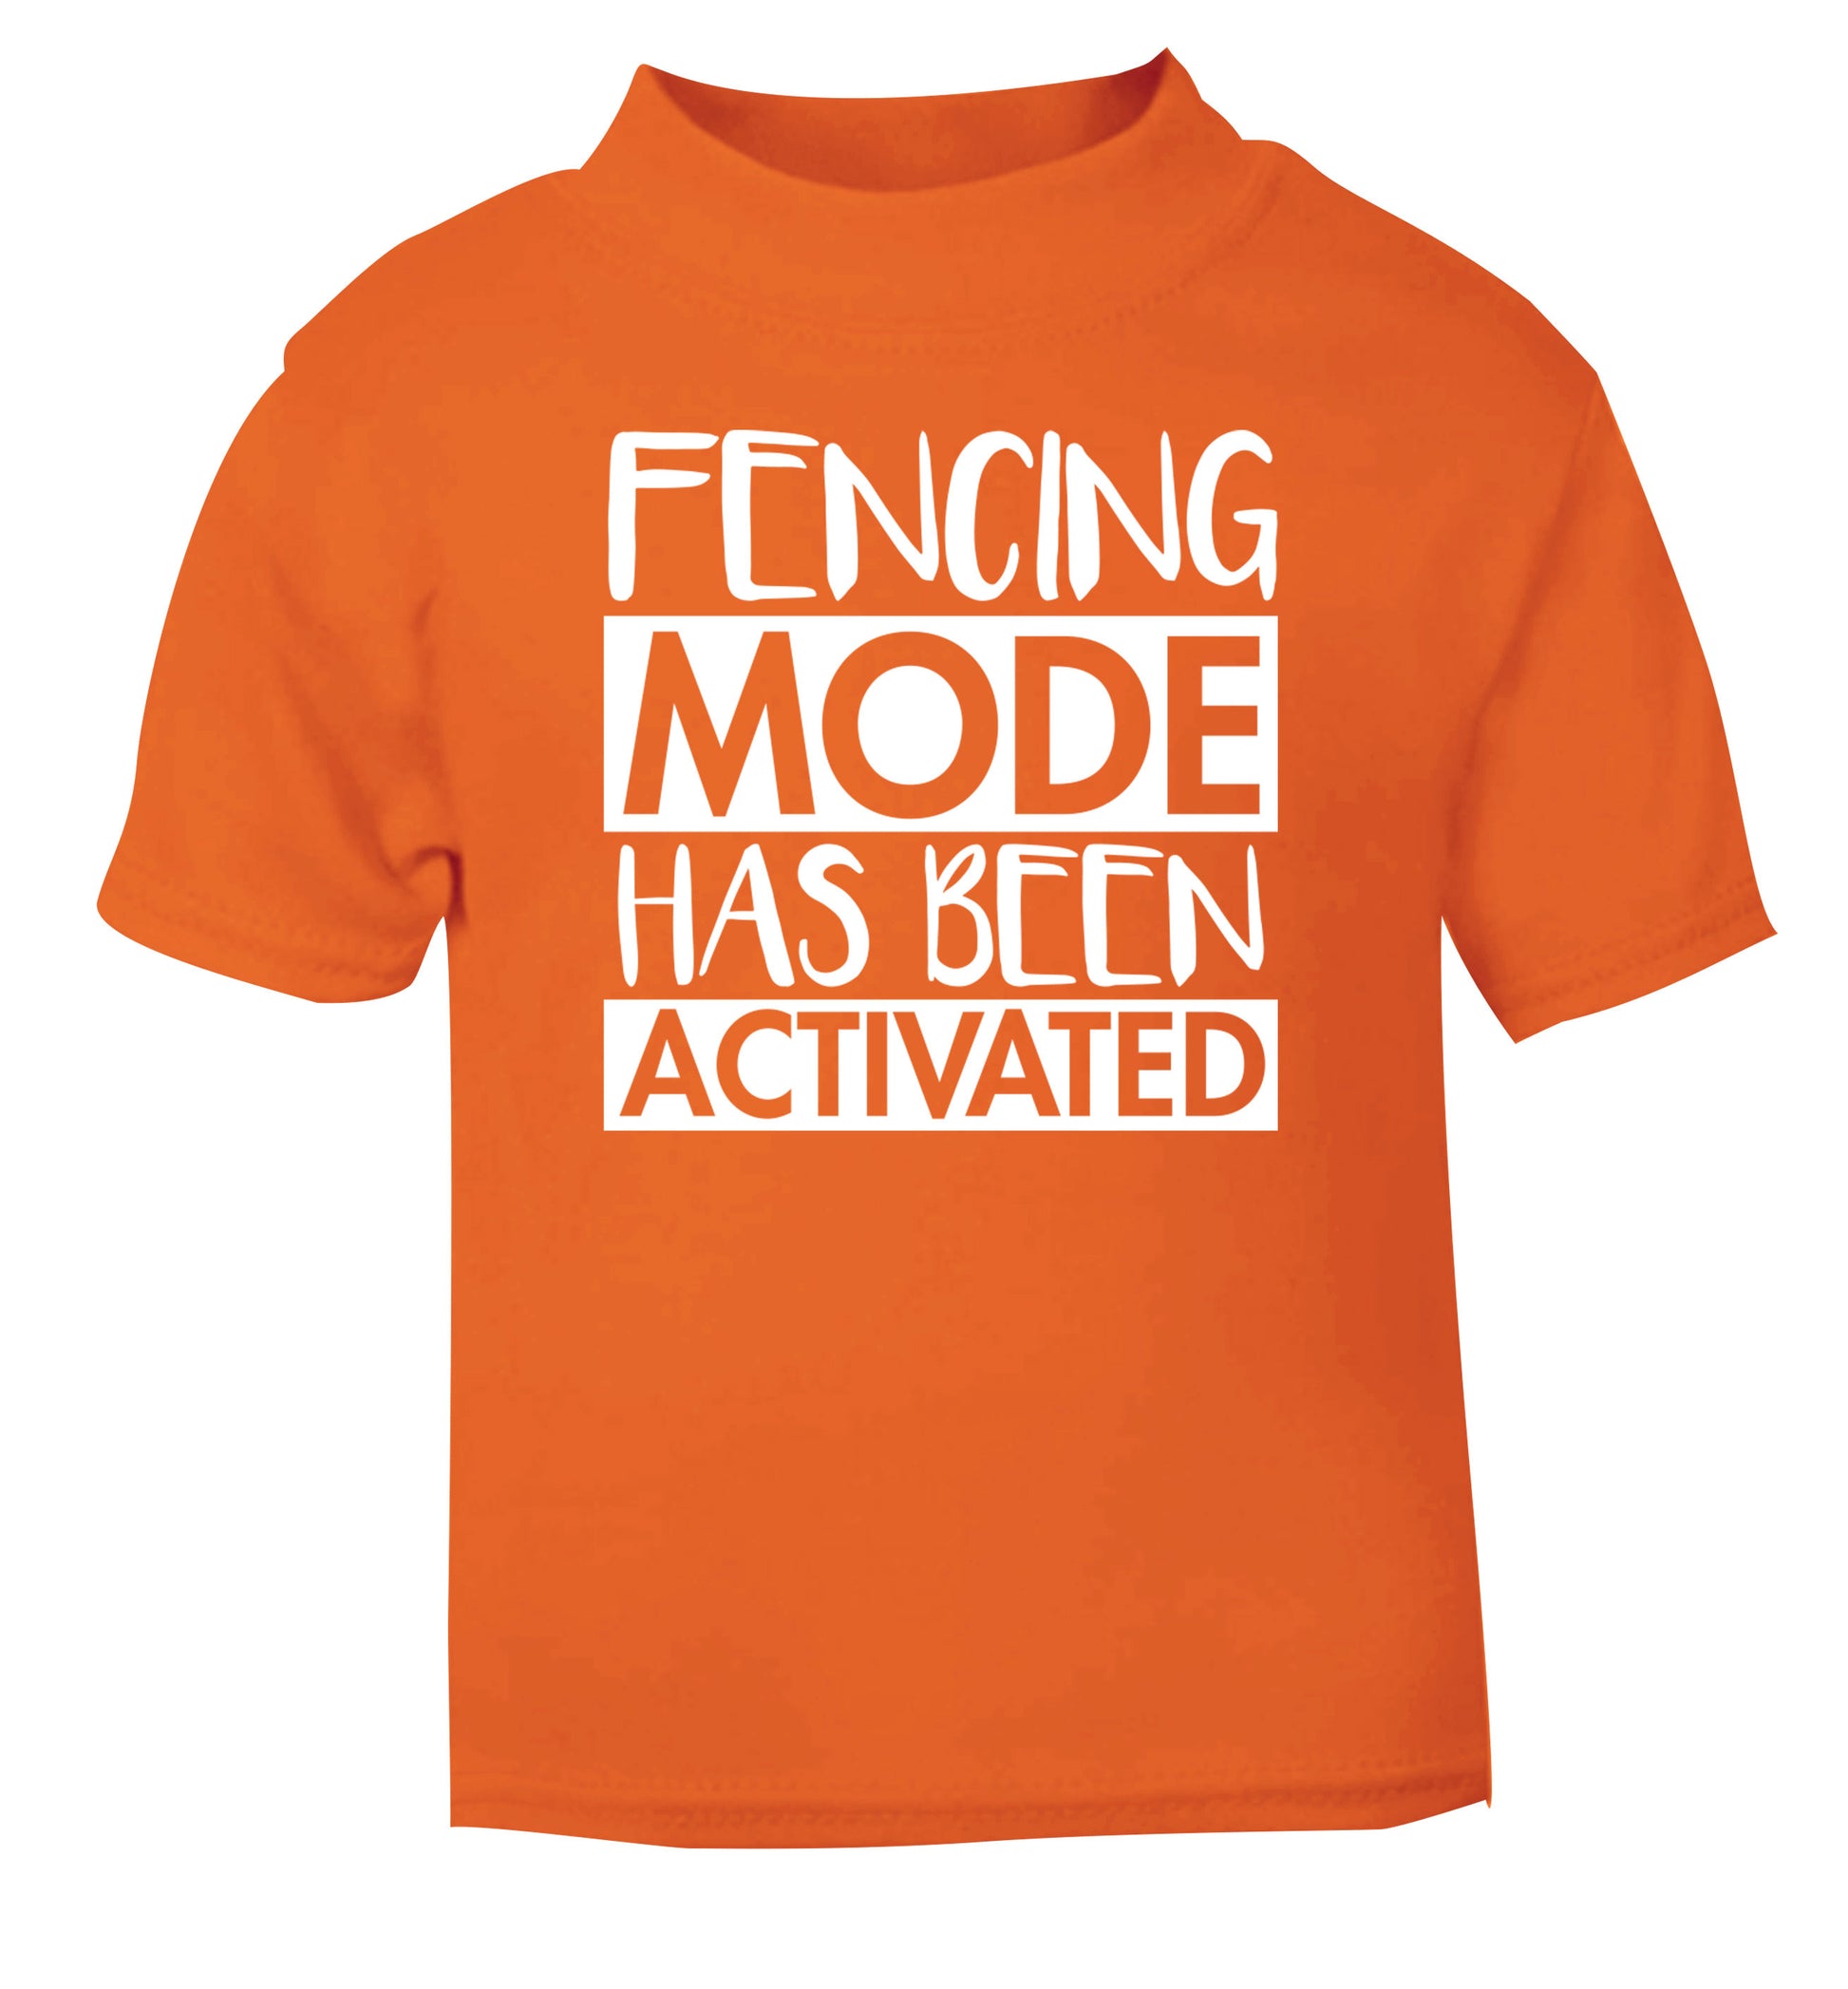 Fencing mode activated orange Baby Toddler Tshirt 2 Years